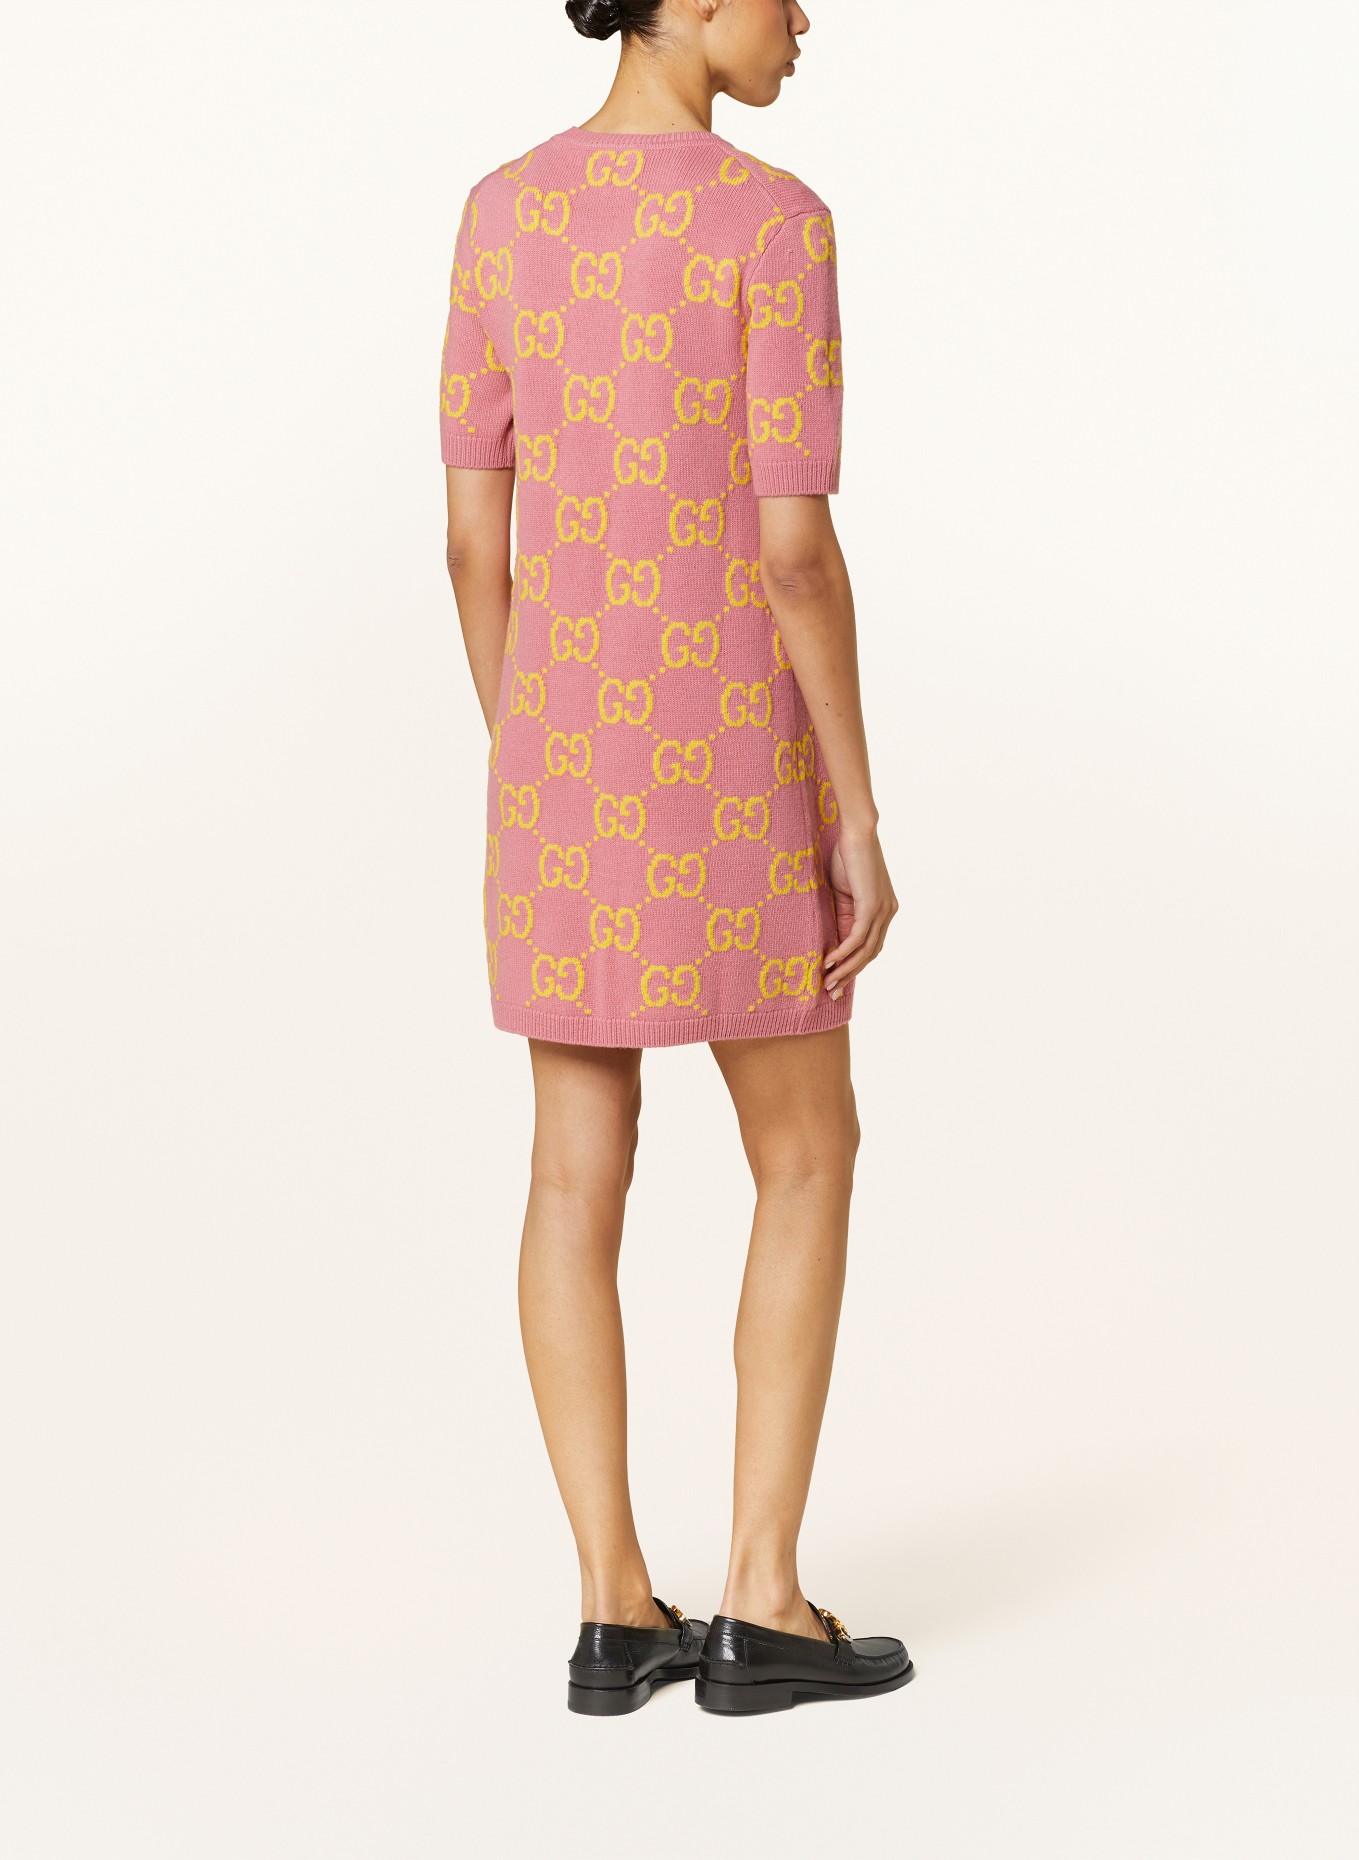 GUCCI Knit dress, Color: PINK/ DARK YELLOW (Image 3)